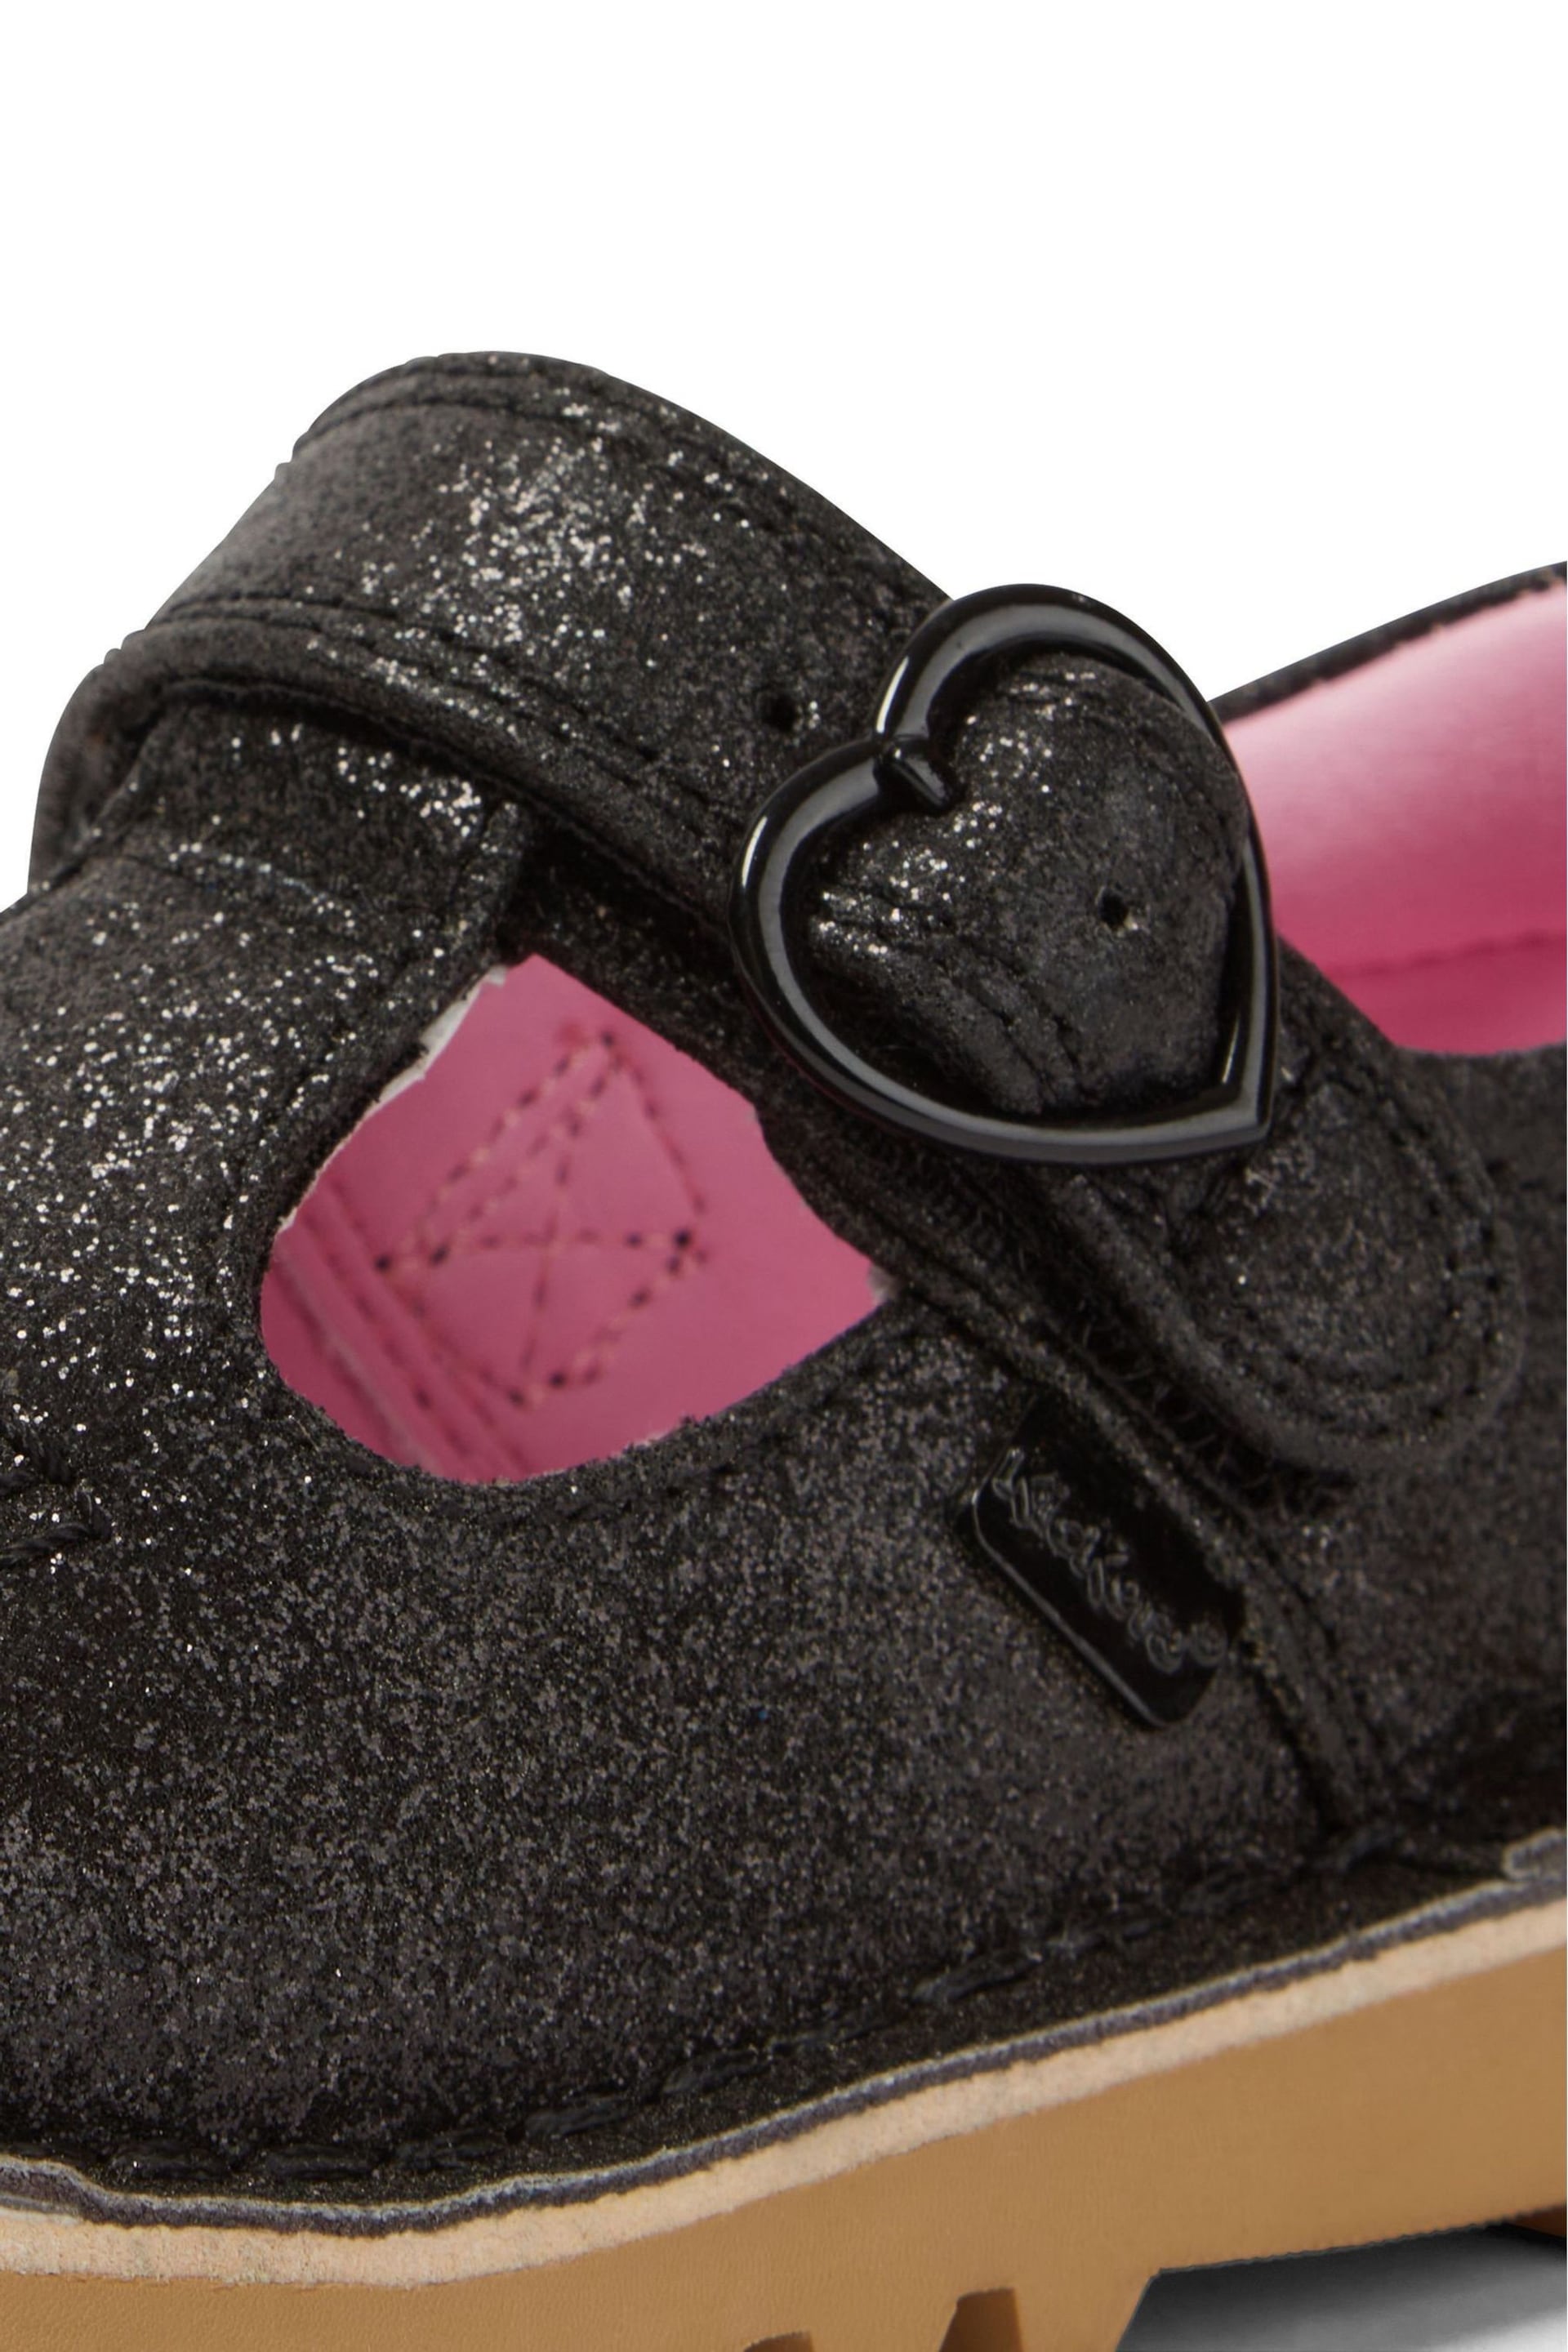 Kickers T Bar Glitter Text If Shoes - Image 5 of 5